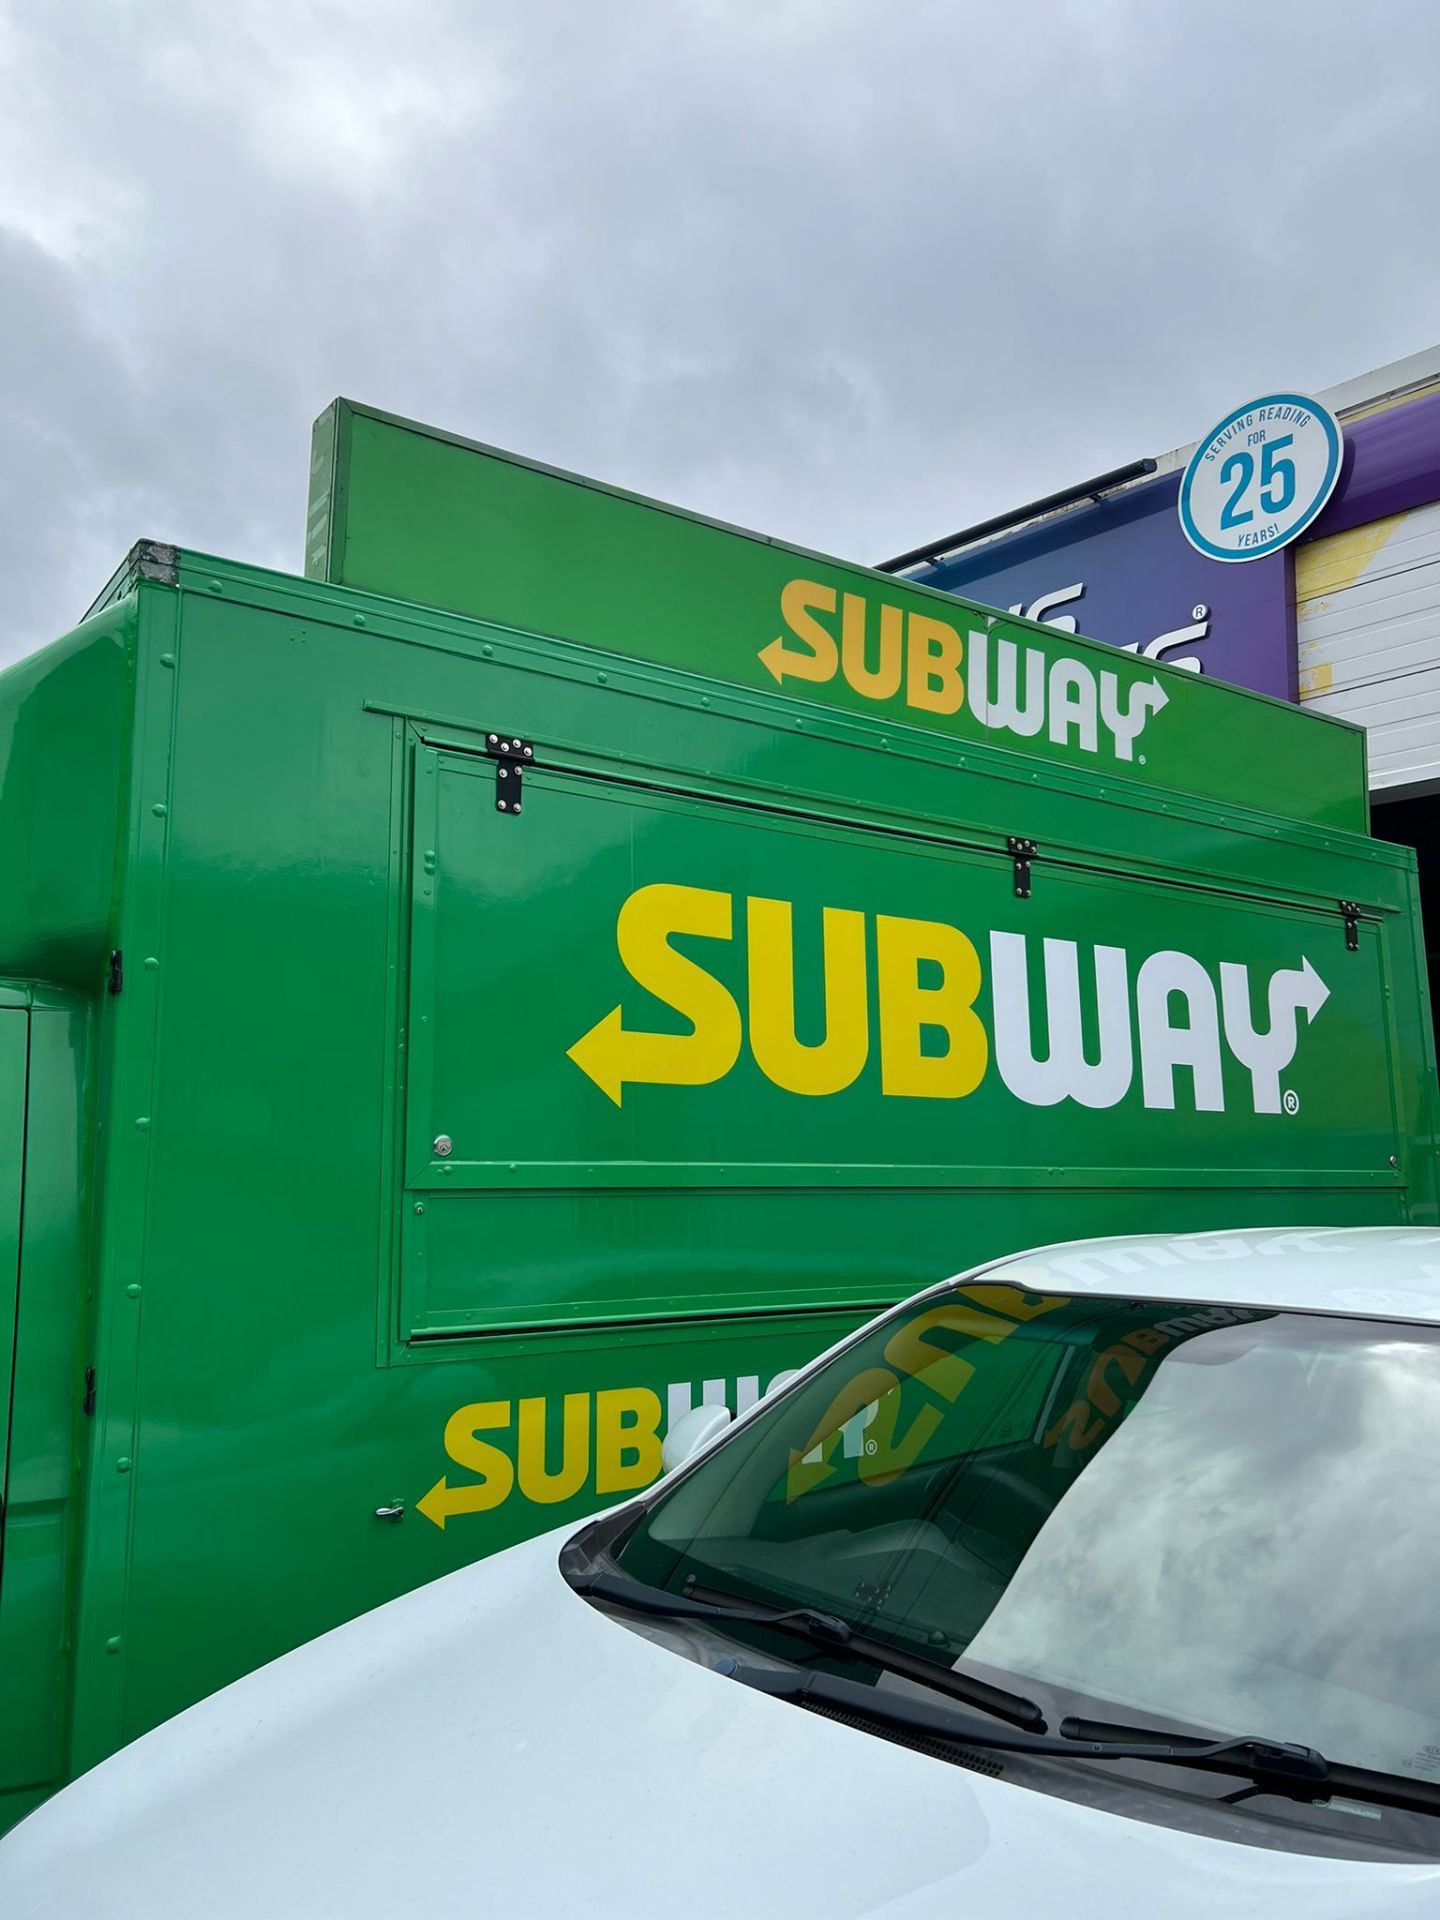 2006, Renault Master - SUBWAY Catering Truck - Image 11 of 13